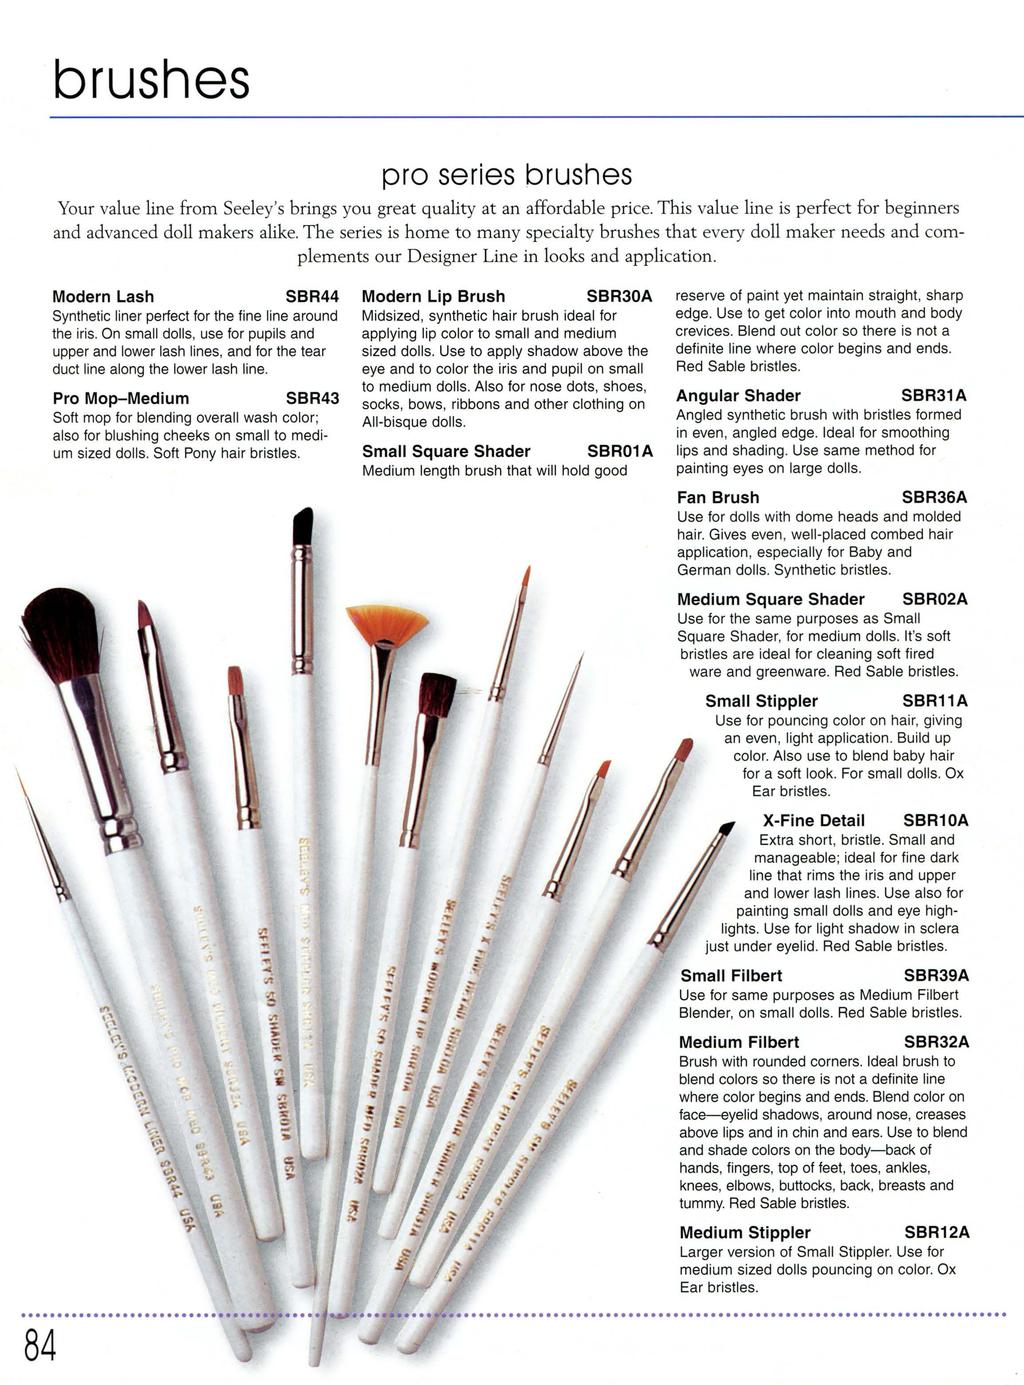 brushes pro series brushes Your value line from Seeley's brings you great quality at an affordable price. This value line is perfect for beginners and advanced doll makers alike.